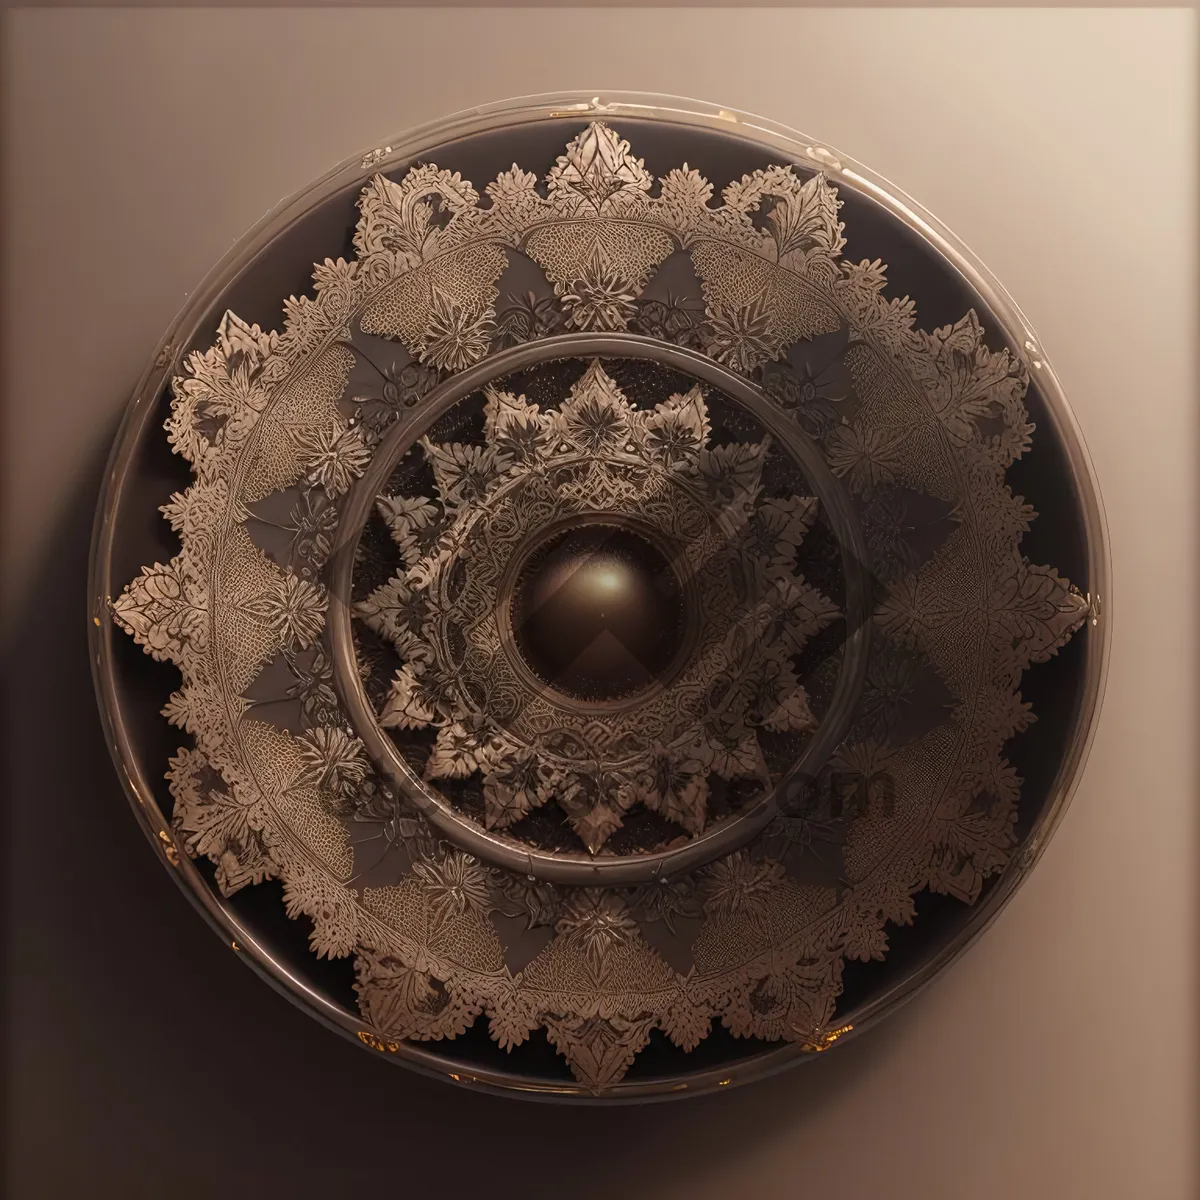 Picture of Gong Shield: Exquisite Circle Design with Arabesque Accents